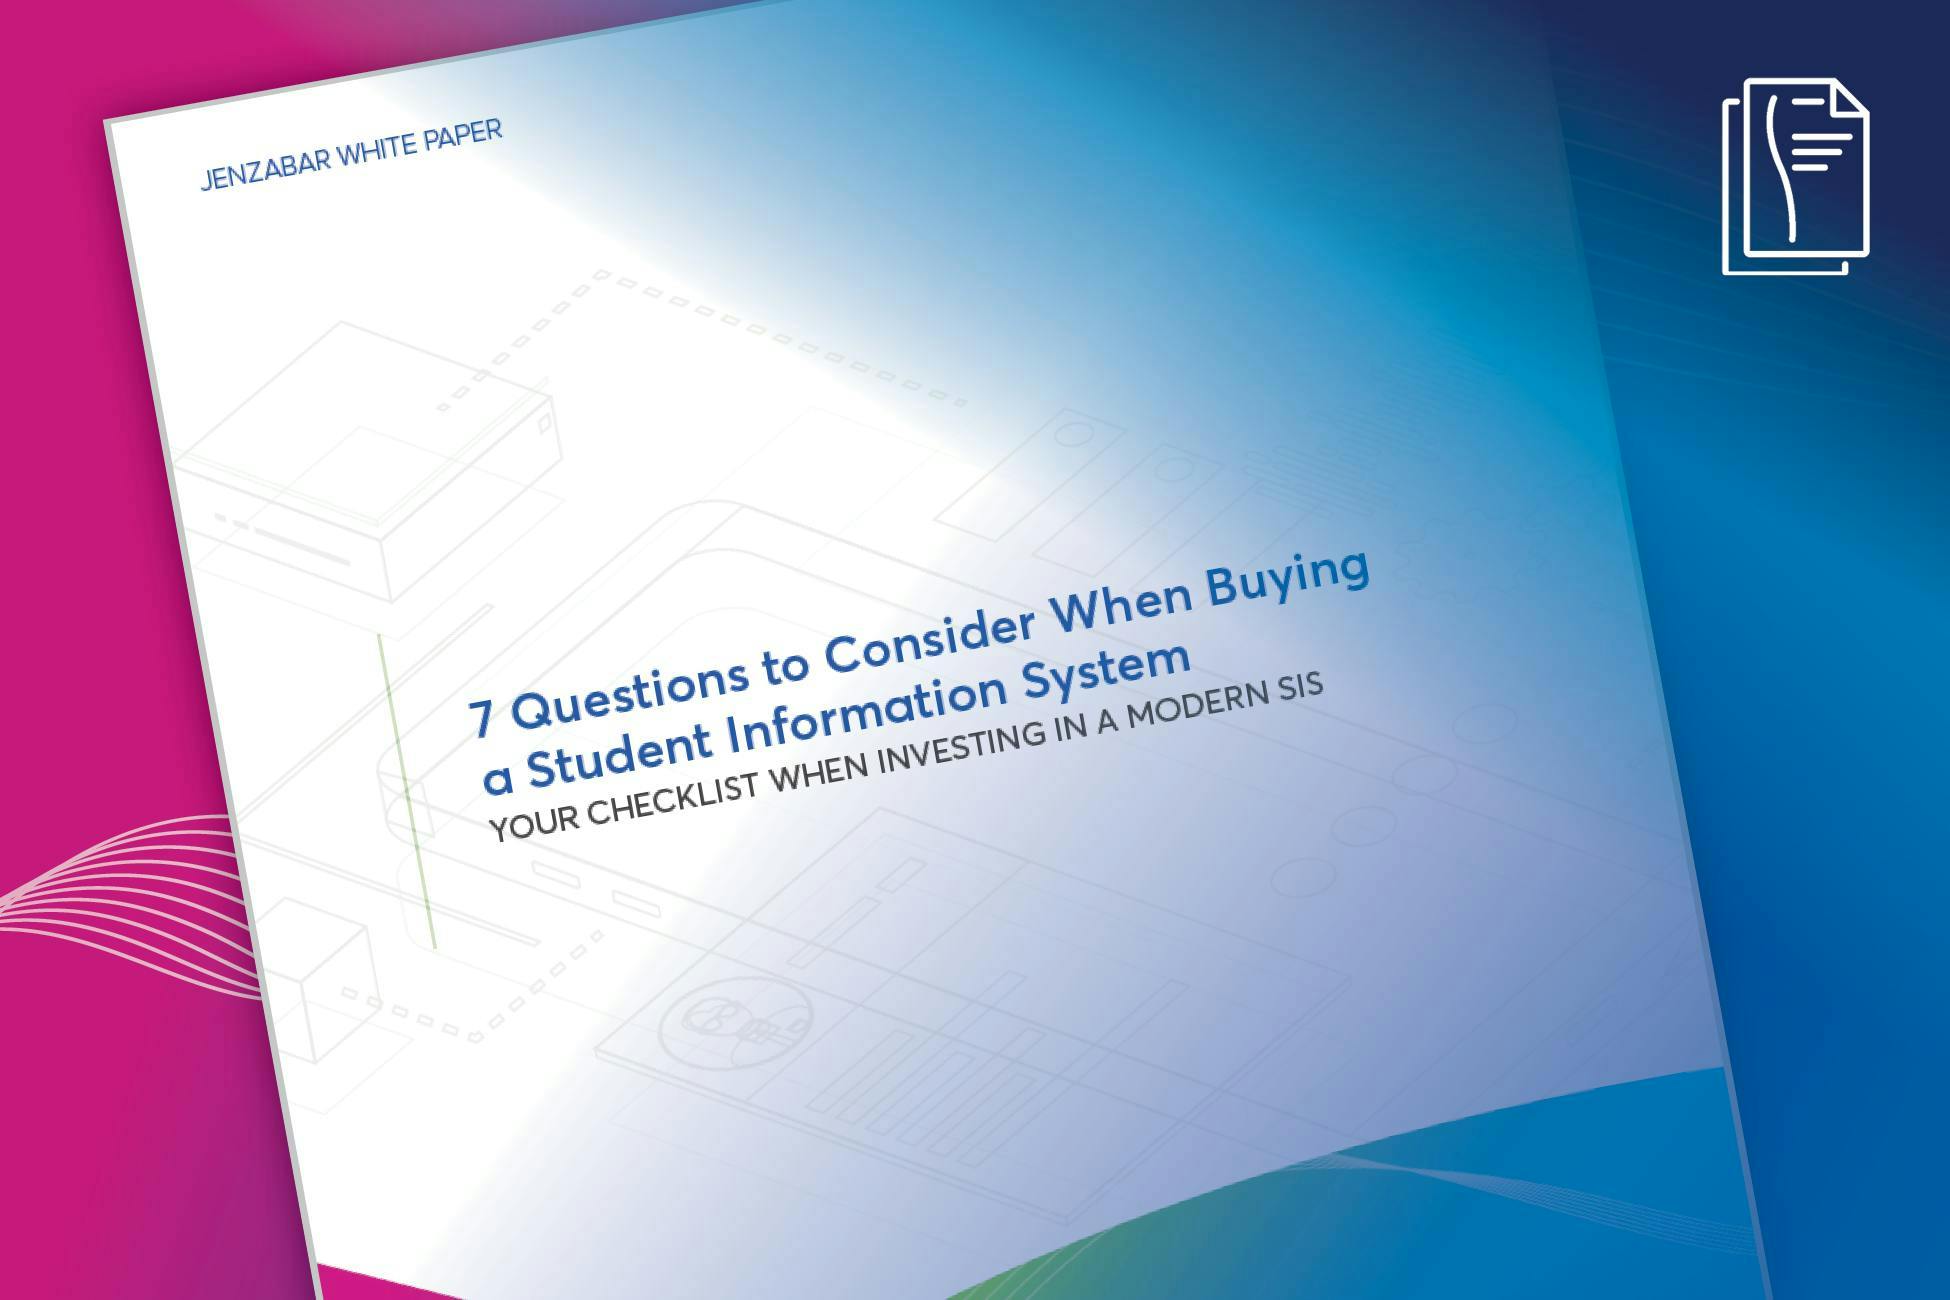 White Paper: 7 Questions to Consider When Buying a Student Information System